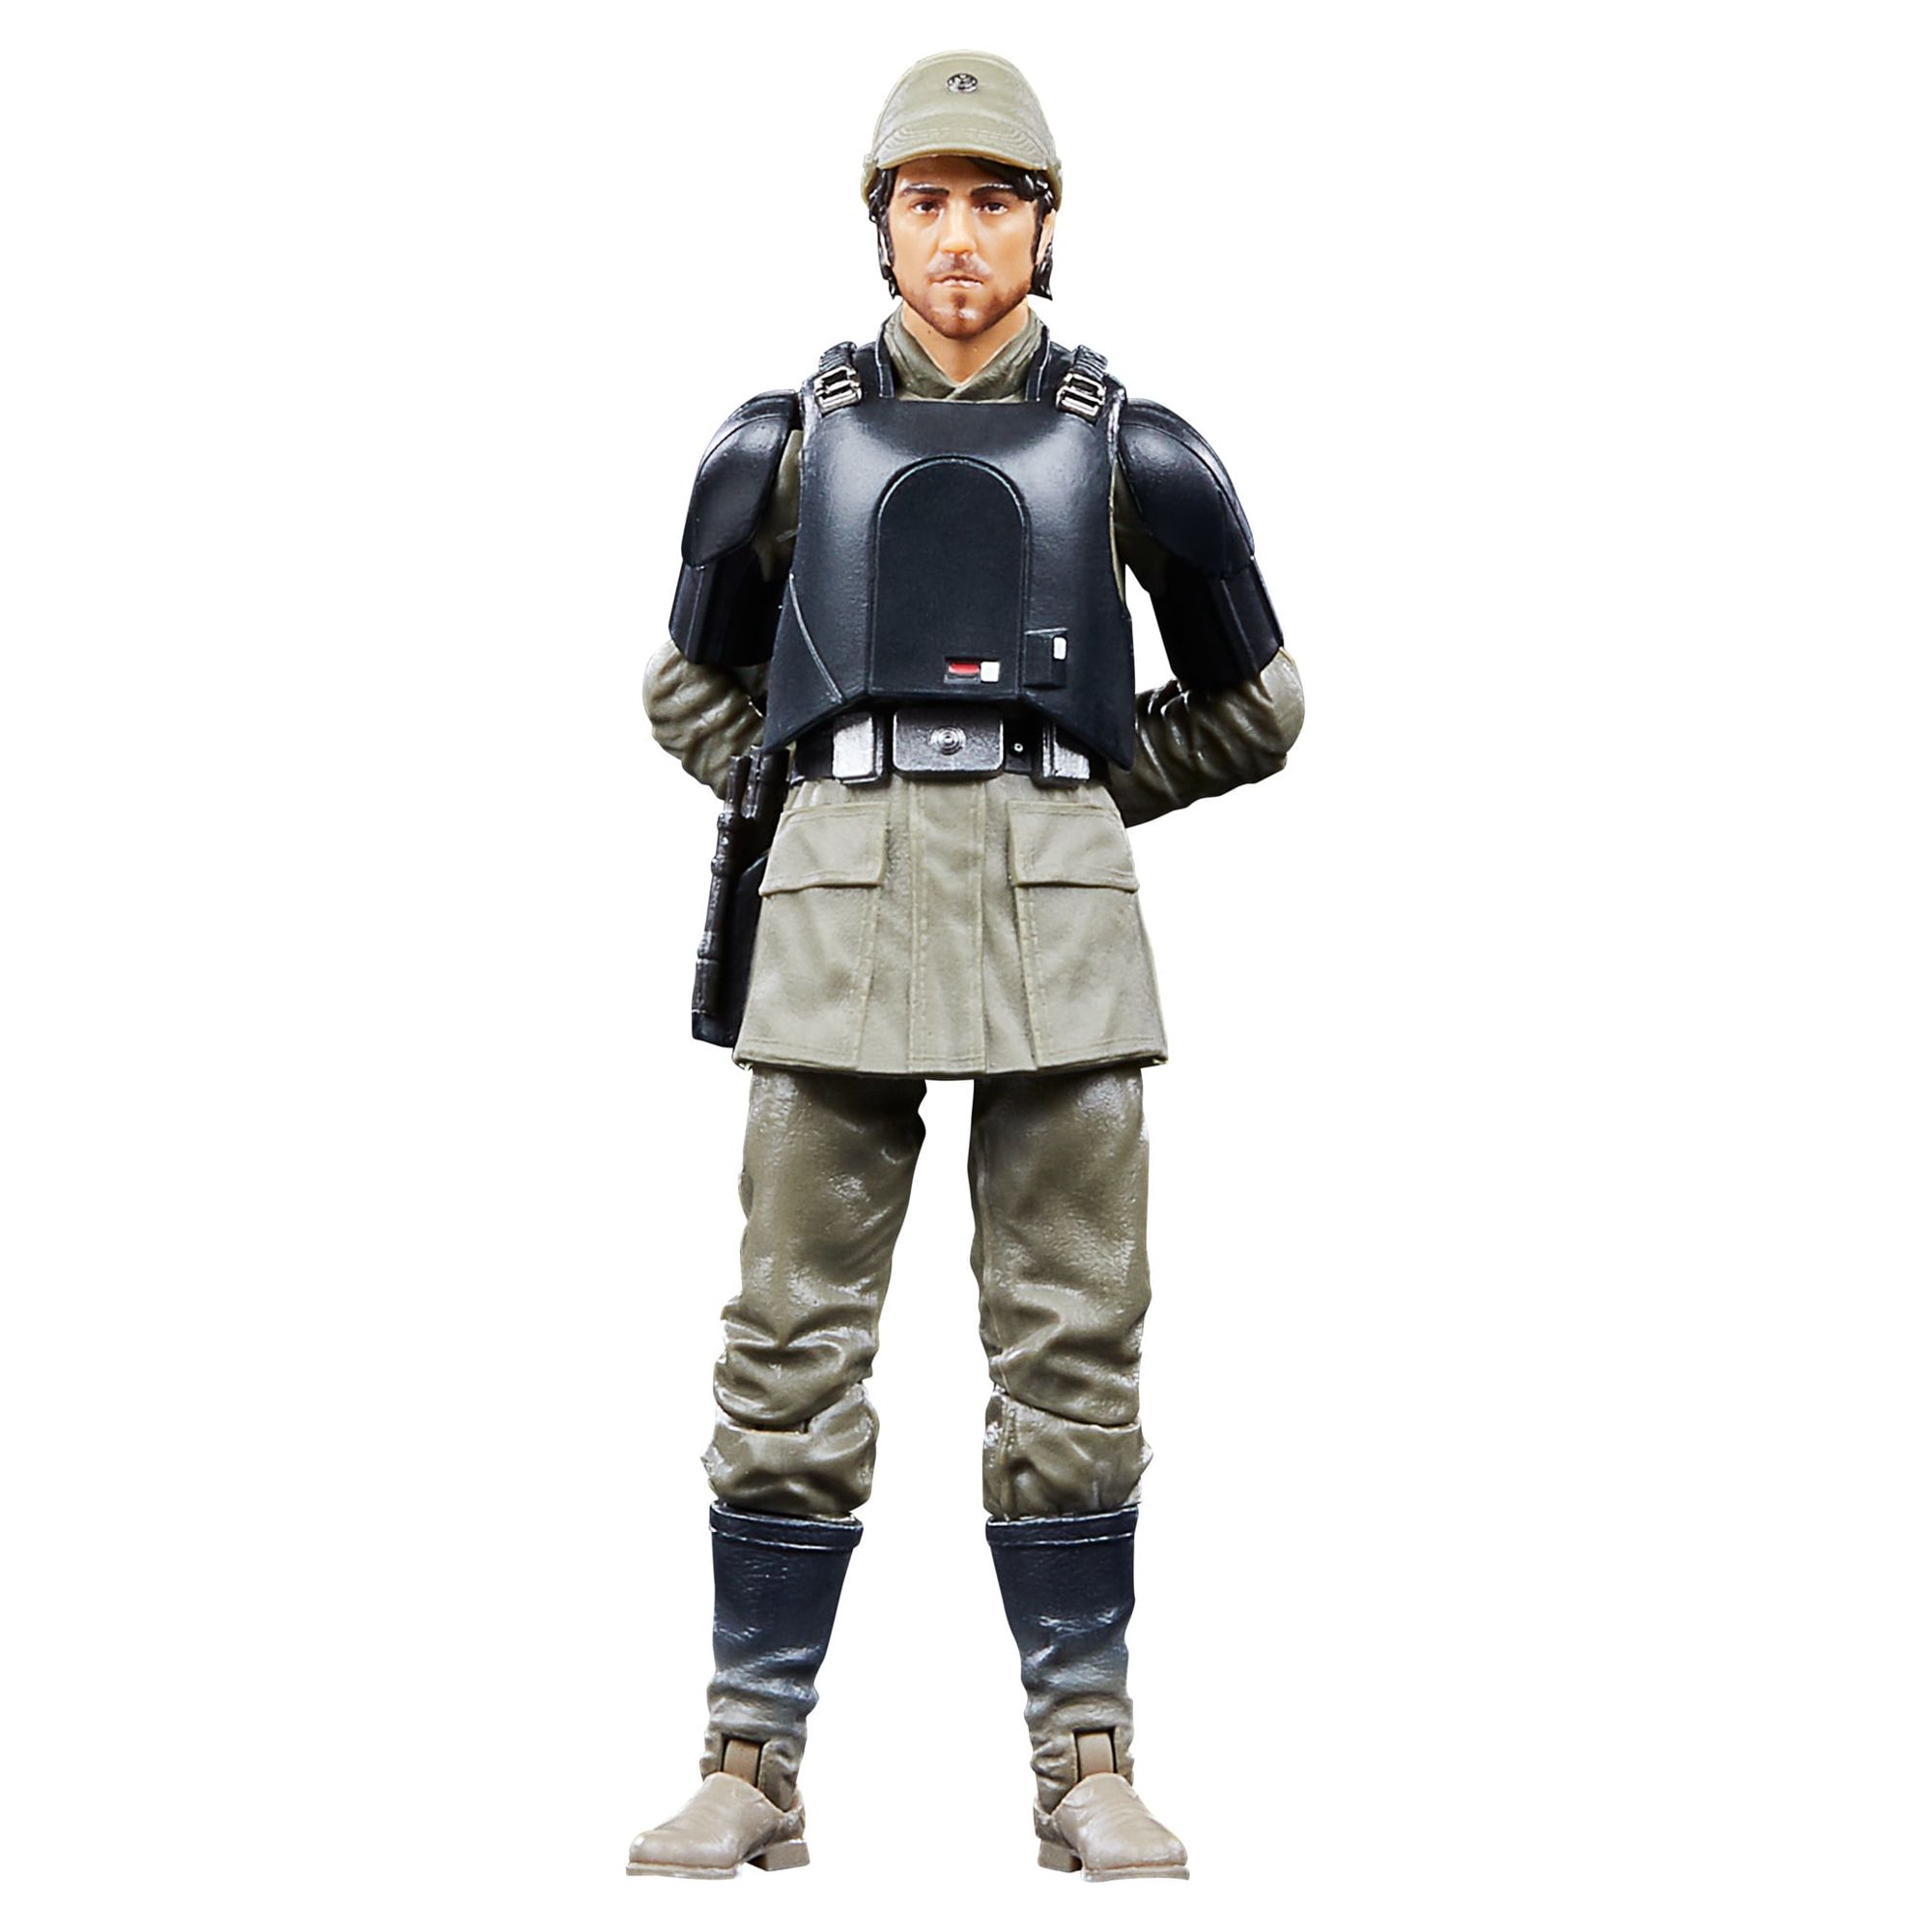 Star Wars: the Black Series Cassian Andor (Aldhani Mission) Kids Toy Action Figure for Boys and Girls Ages 4 5 6 7 8 and Up, Only At Walmart - image 3 of 9